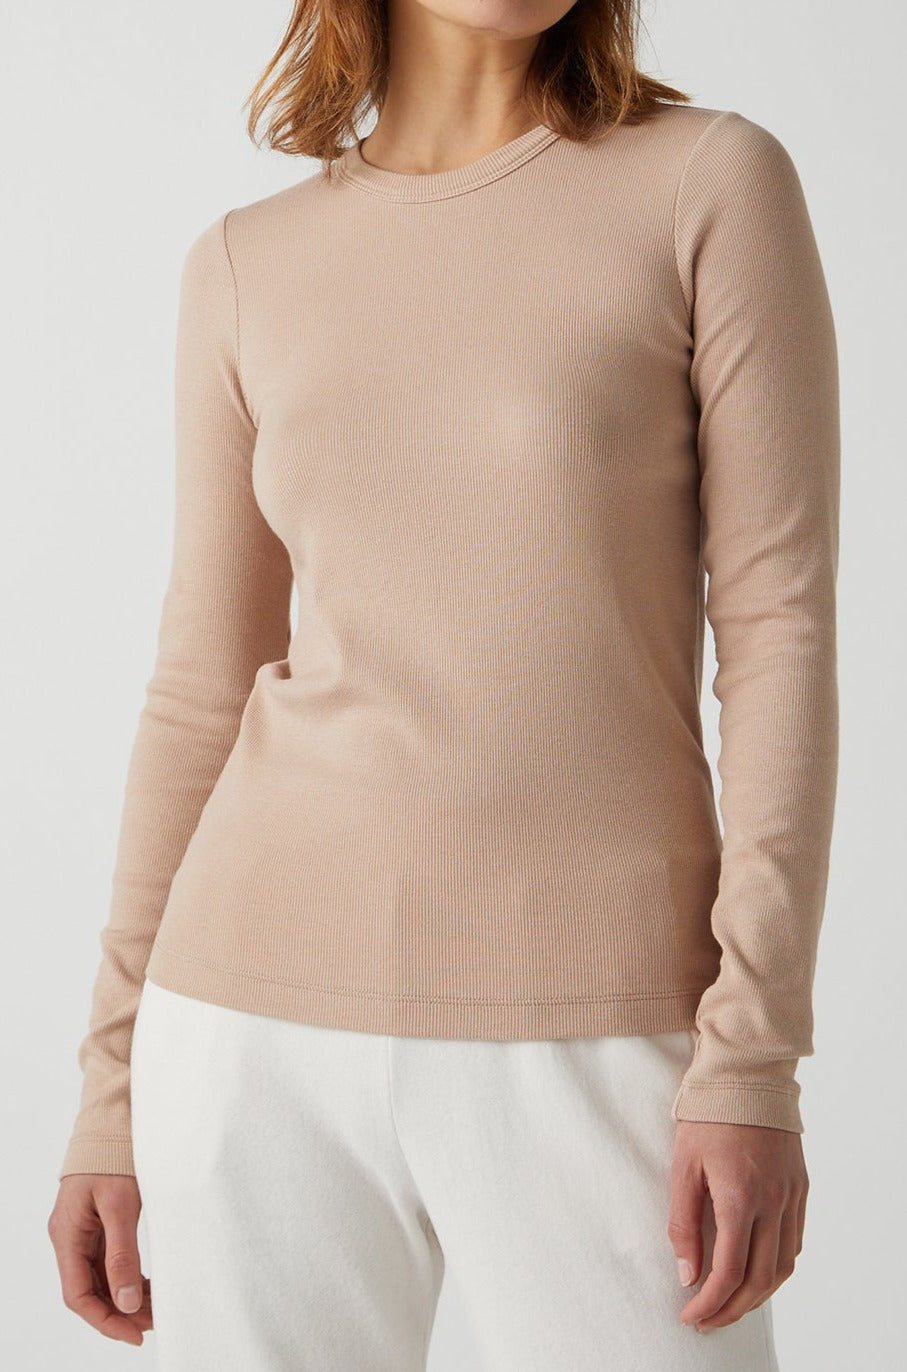 Long Sleeve Camino Tee in nude front-26458425065665